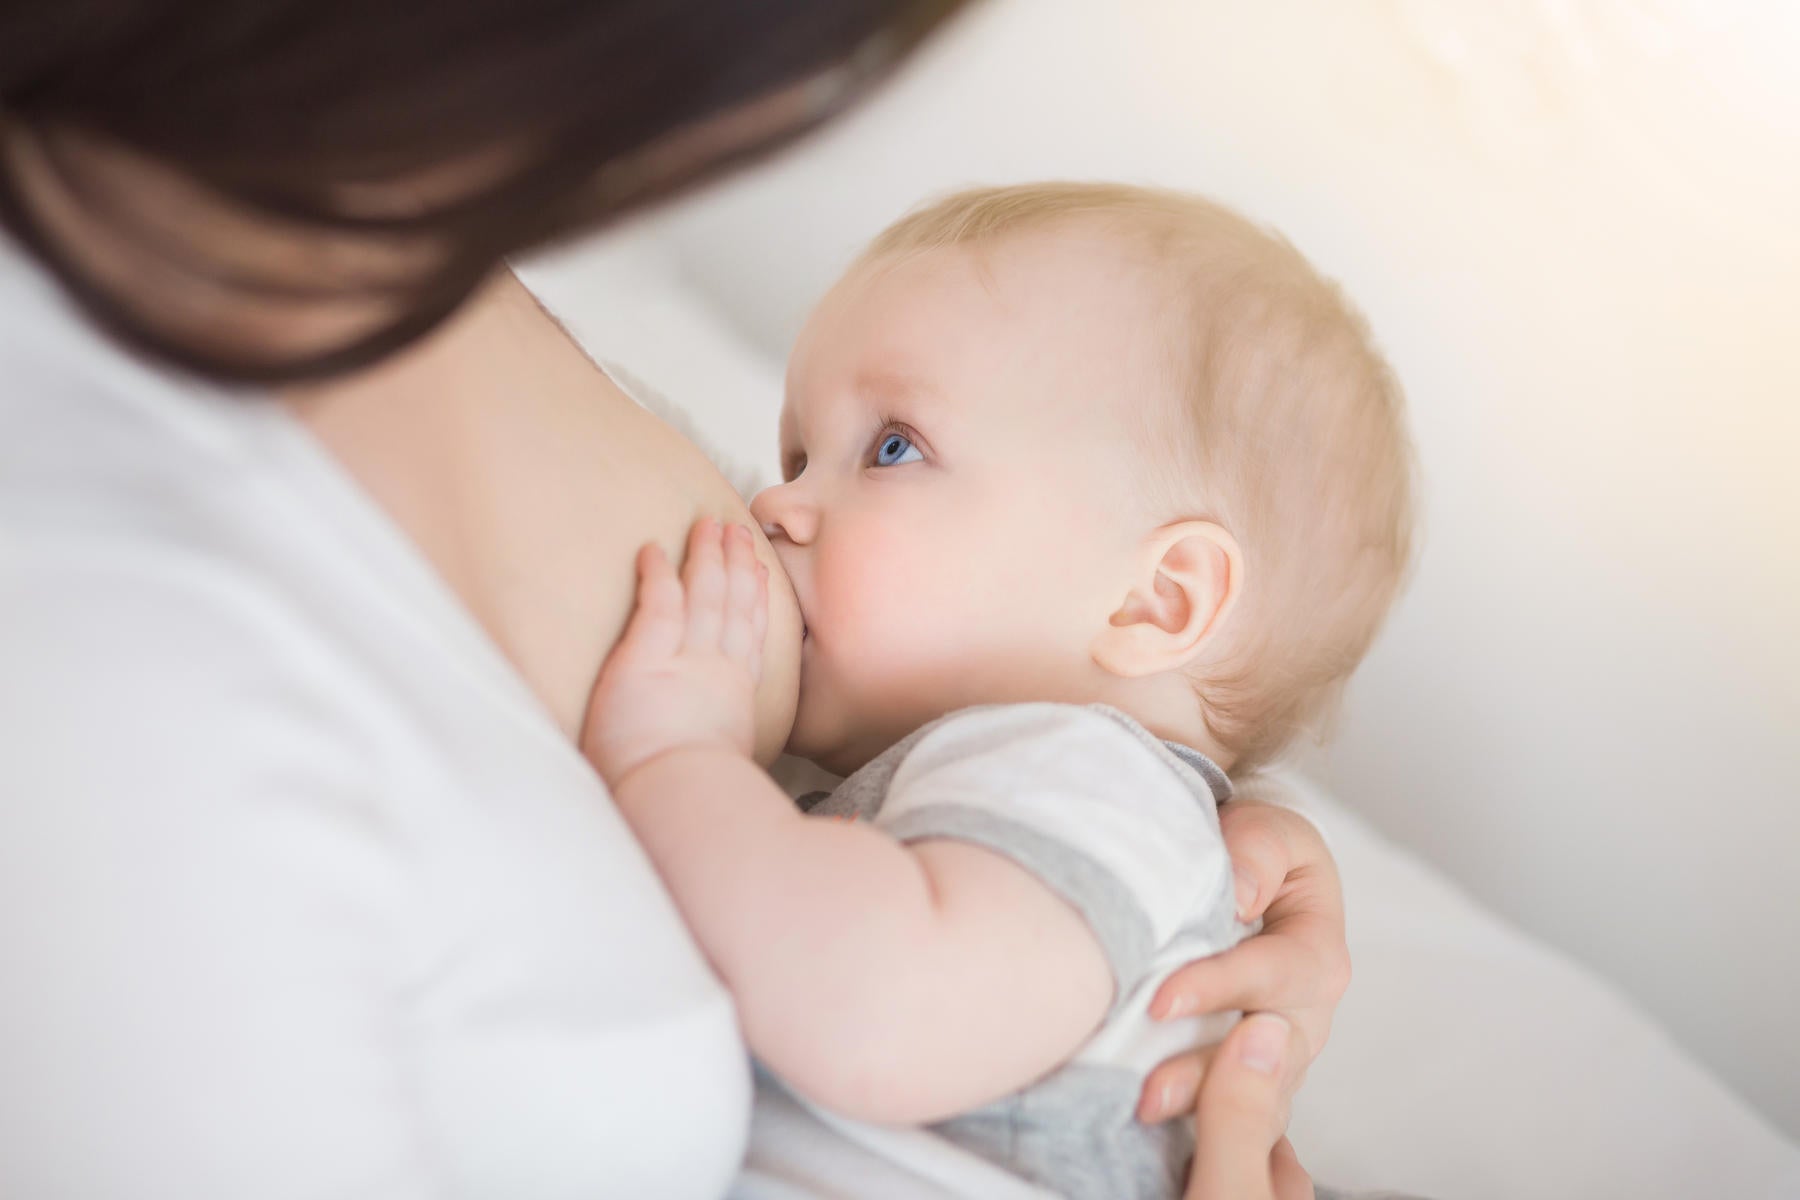 Is sagging breasts a normal side effect of breastfeeding?